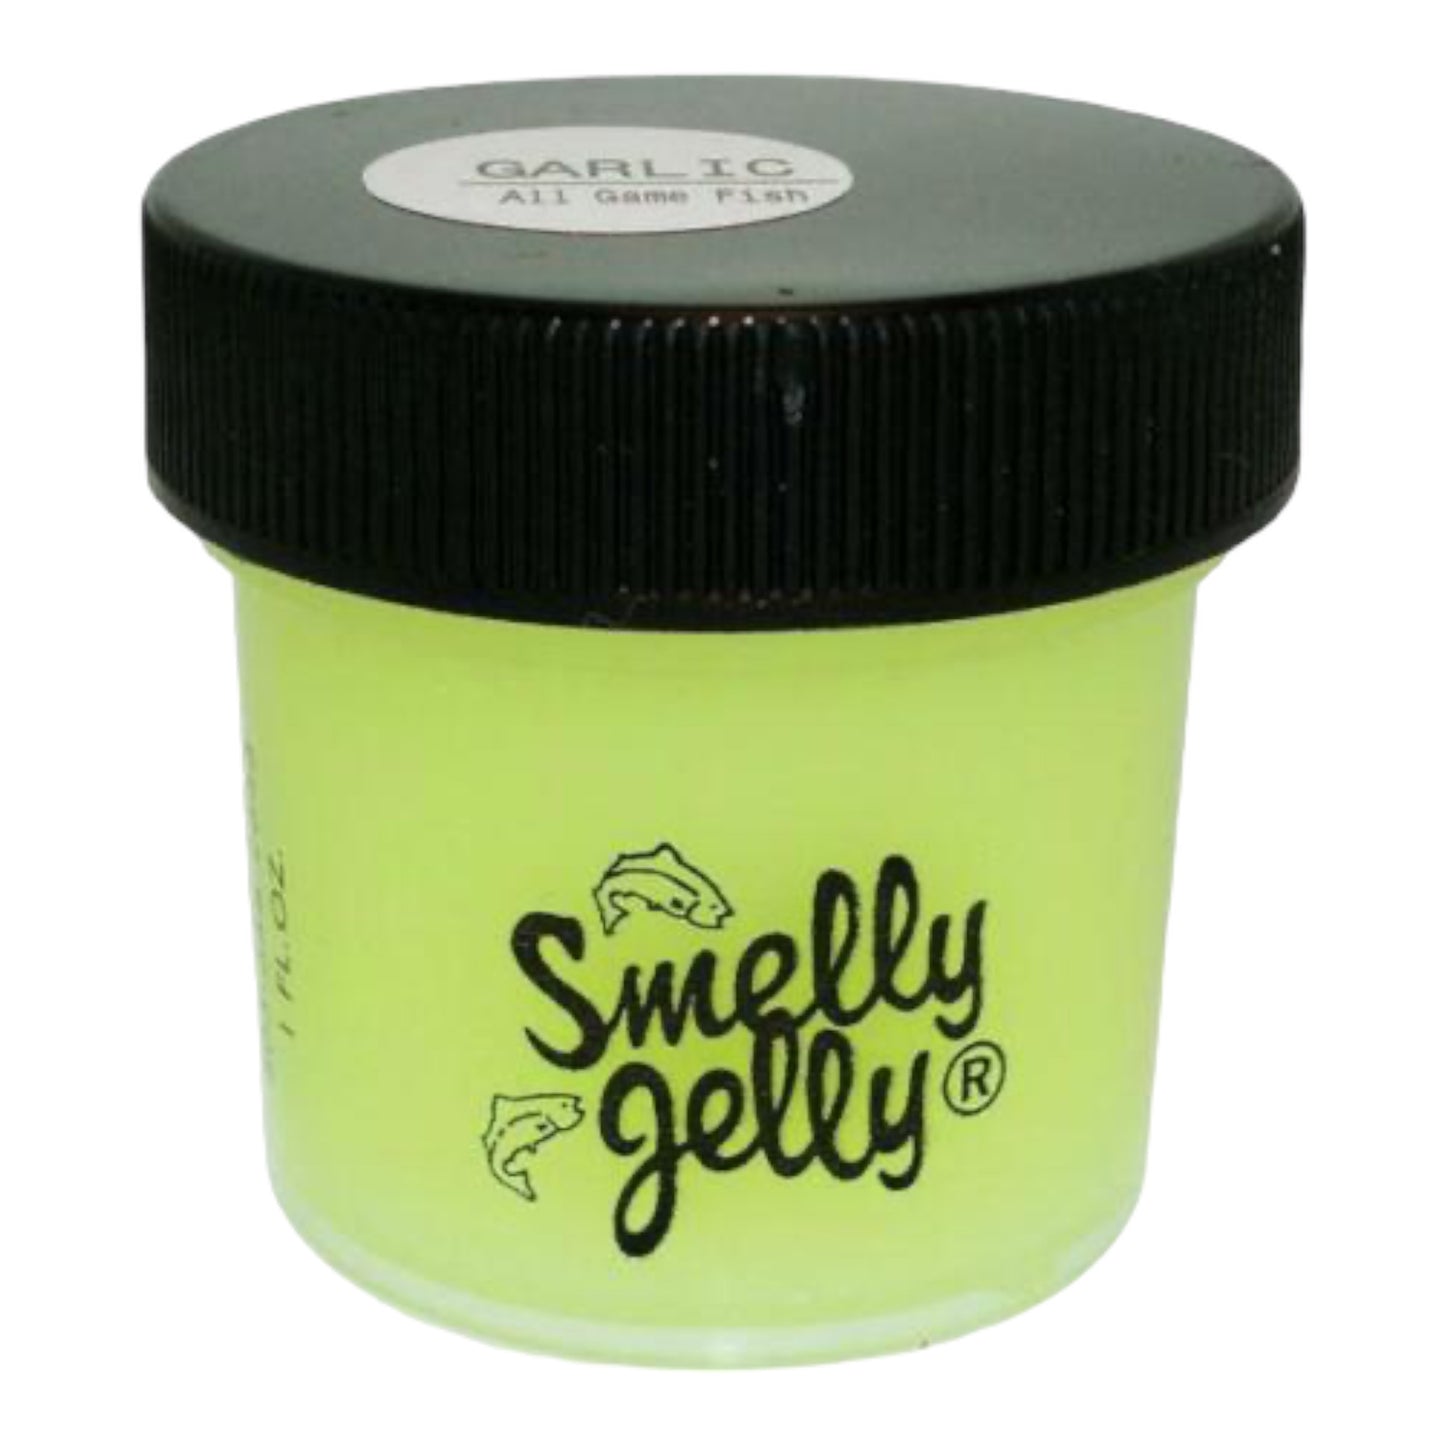 Smelly Jelly Fish Scent Attractant 1oz Jar